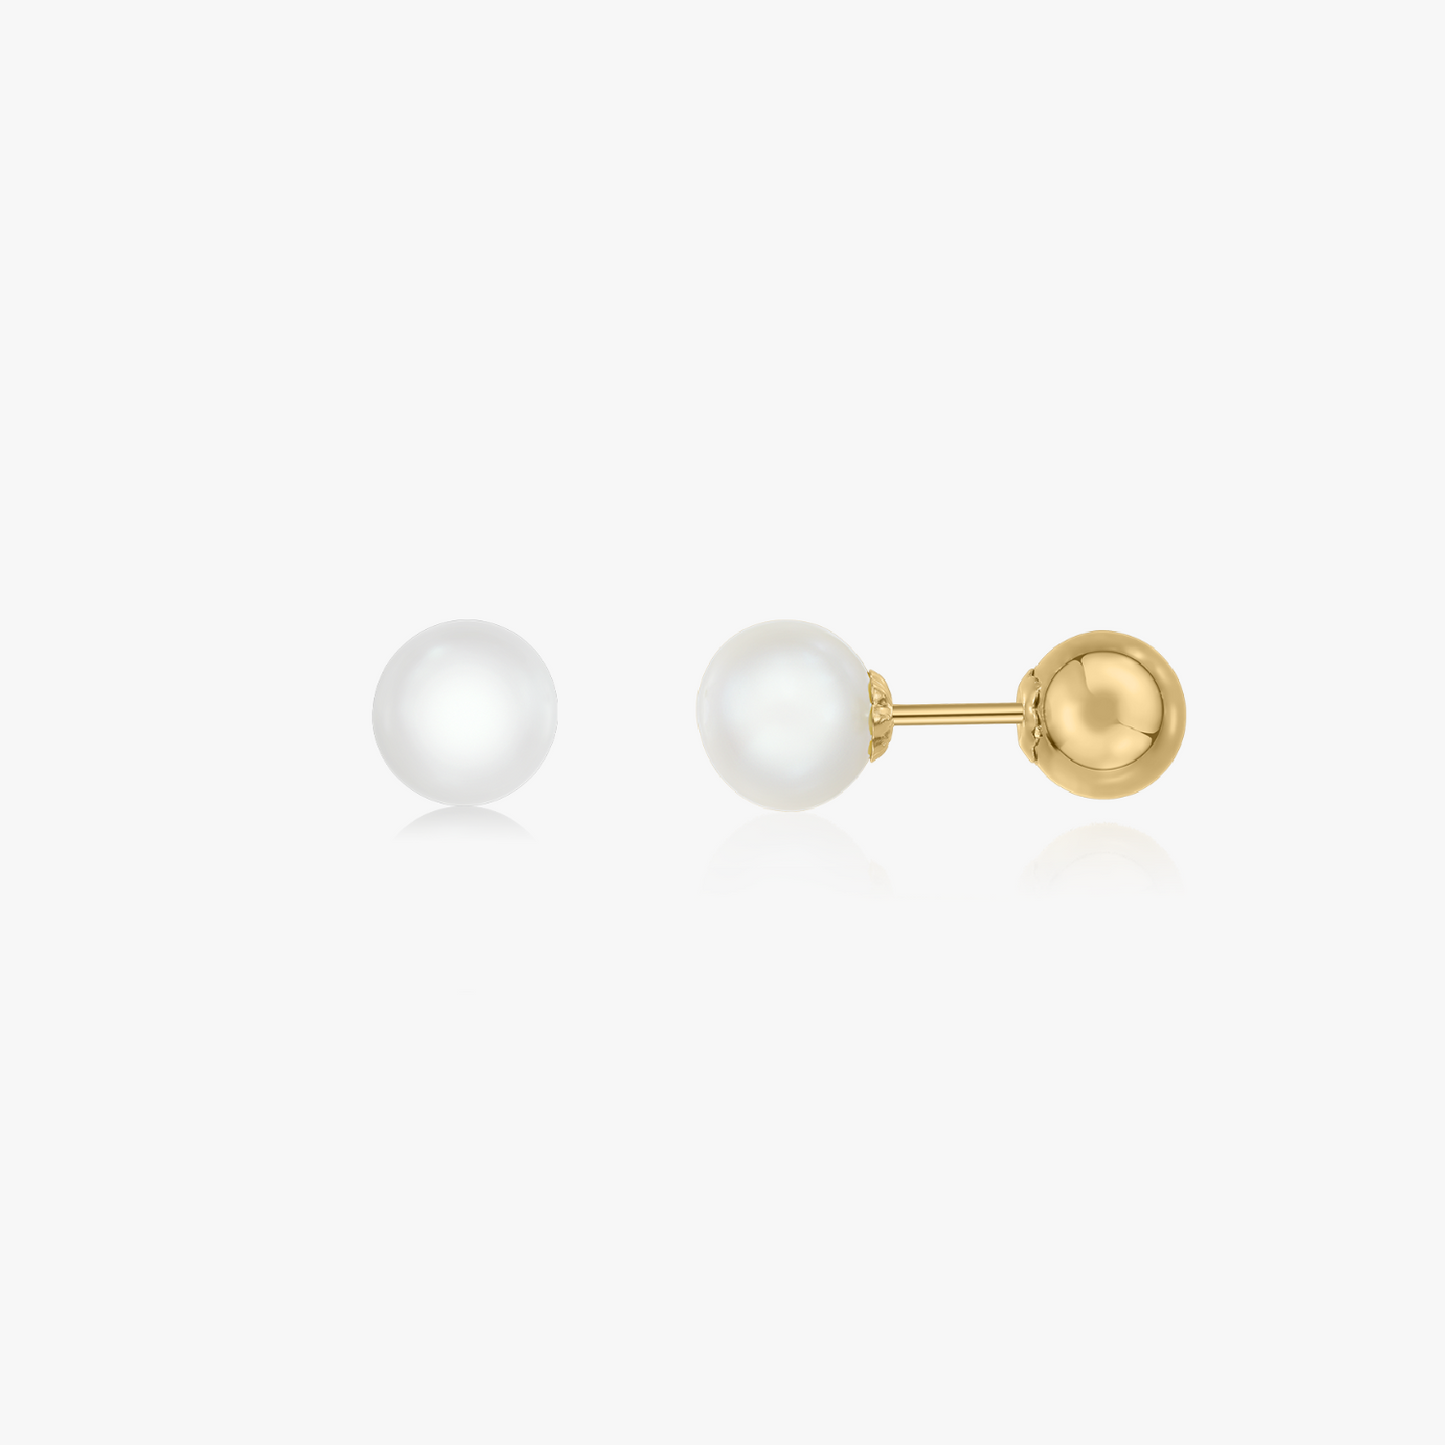 Anna gold earrings - Natural Pearls